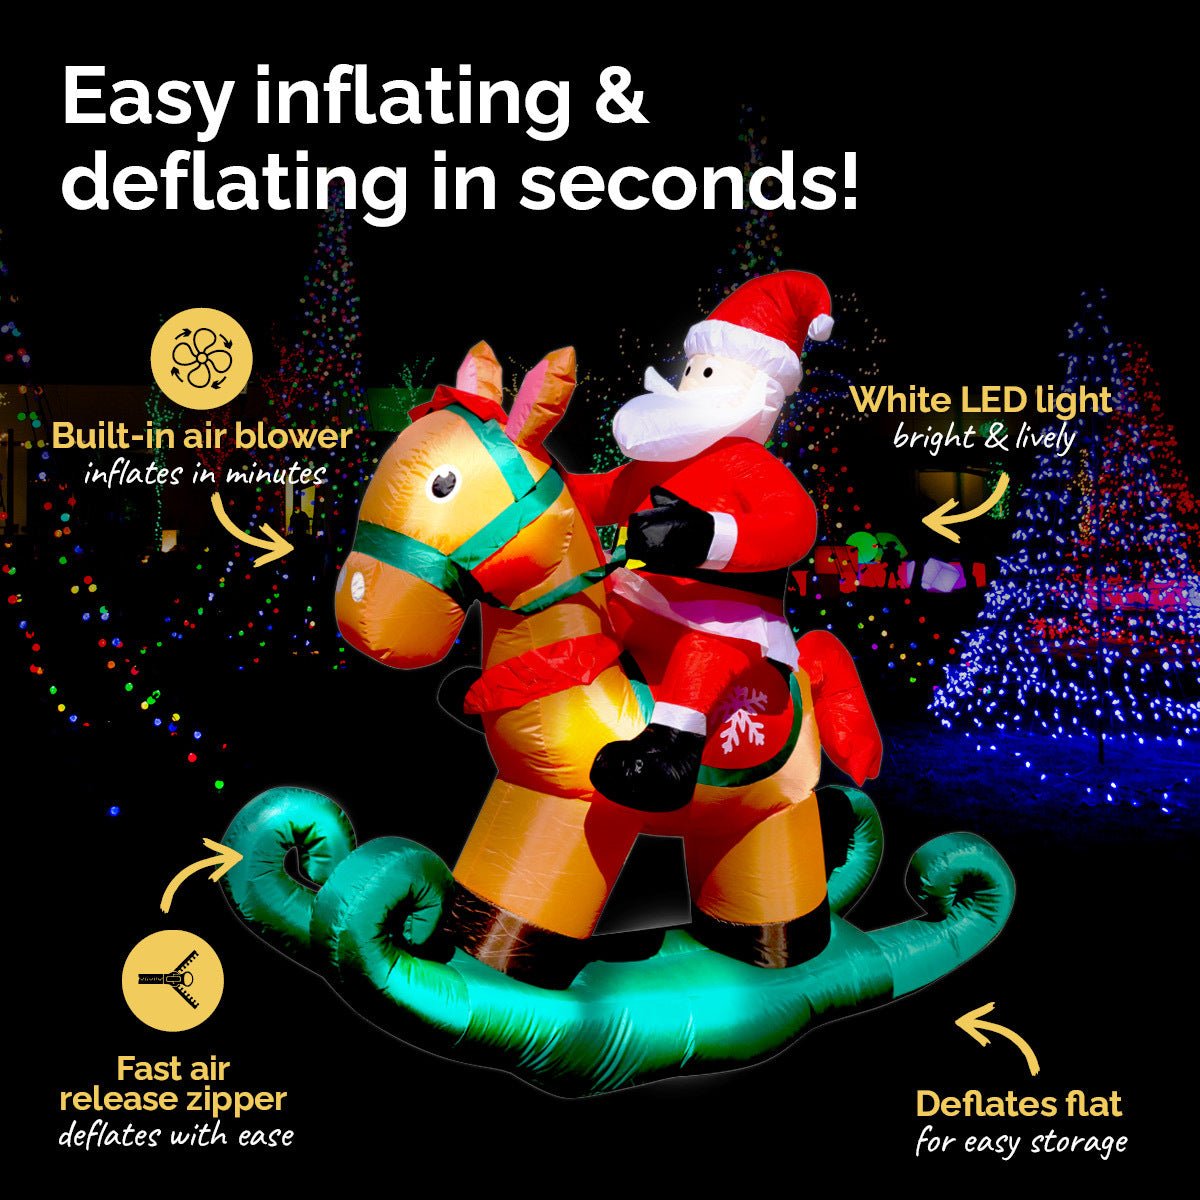 Christmas By Sas 1.8m Self Inflatable LED Santa On Rocking Horse - Little Kids Business